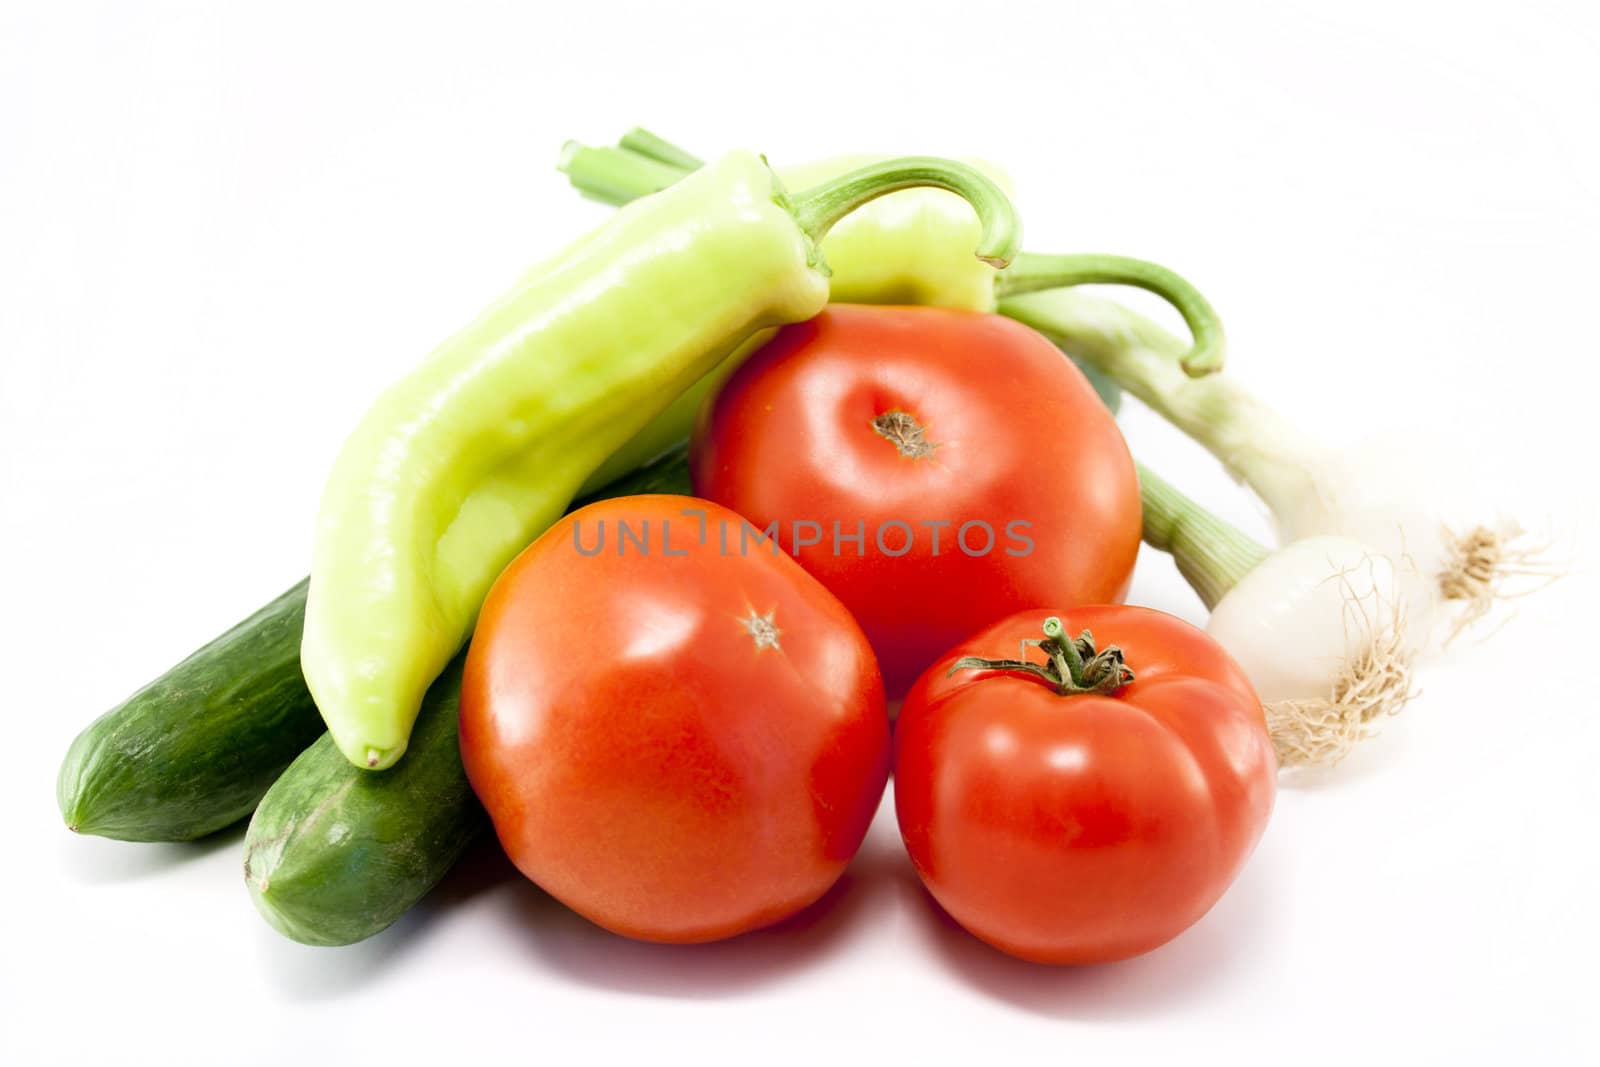 Mix from tomato, garlic, onion, pepper and cucumber. Isolated on white background.